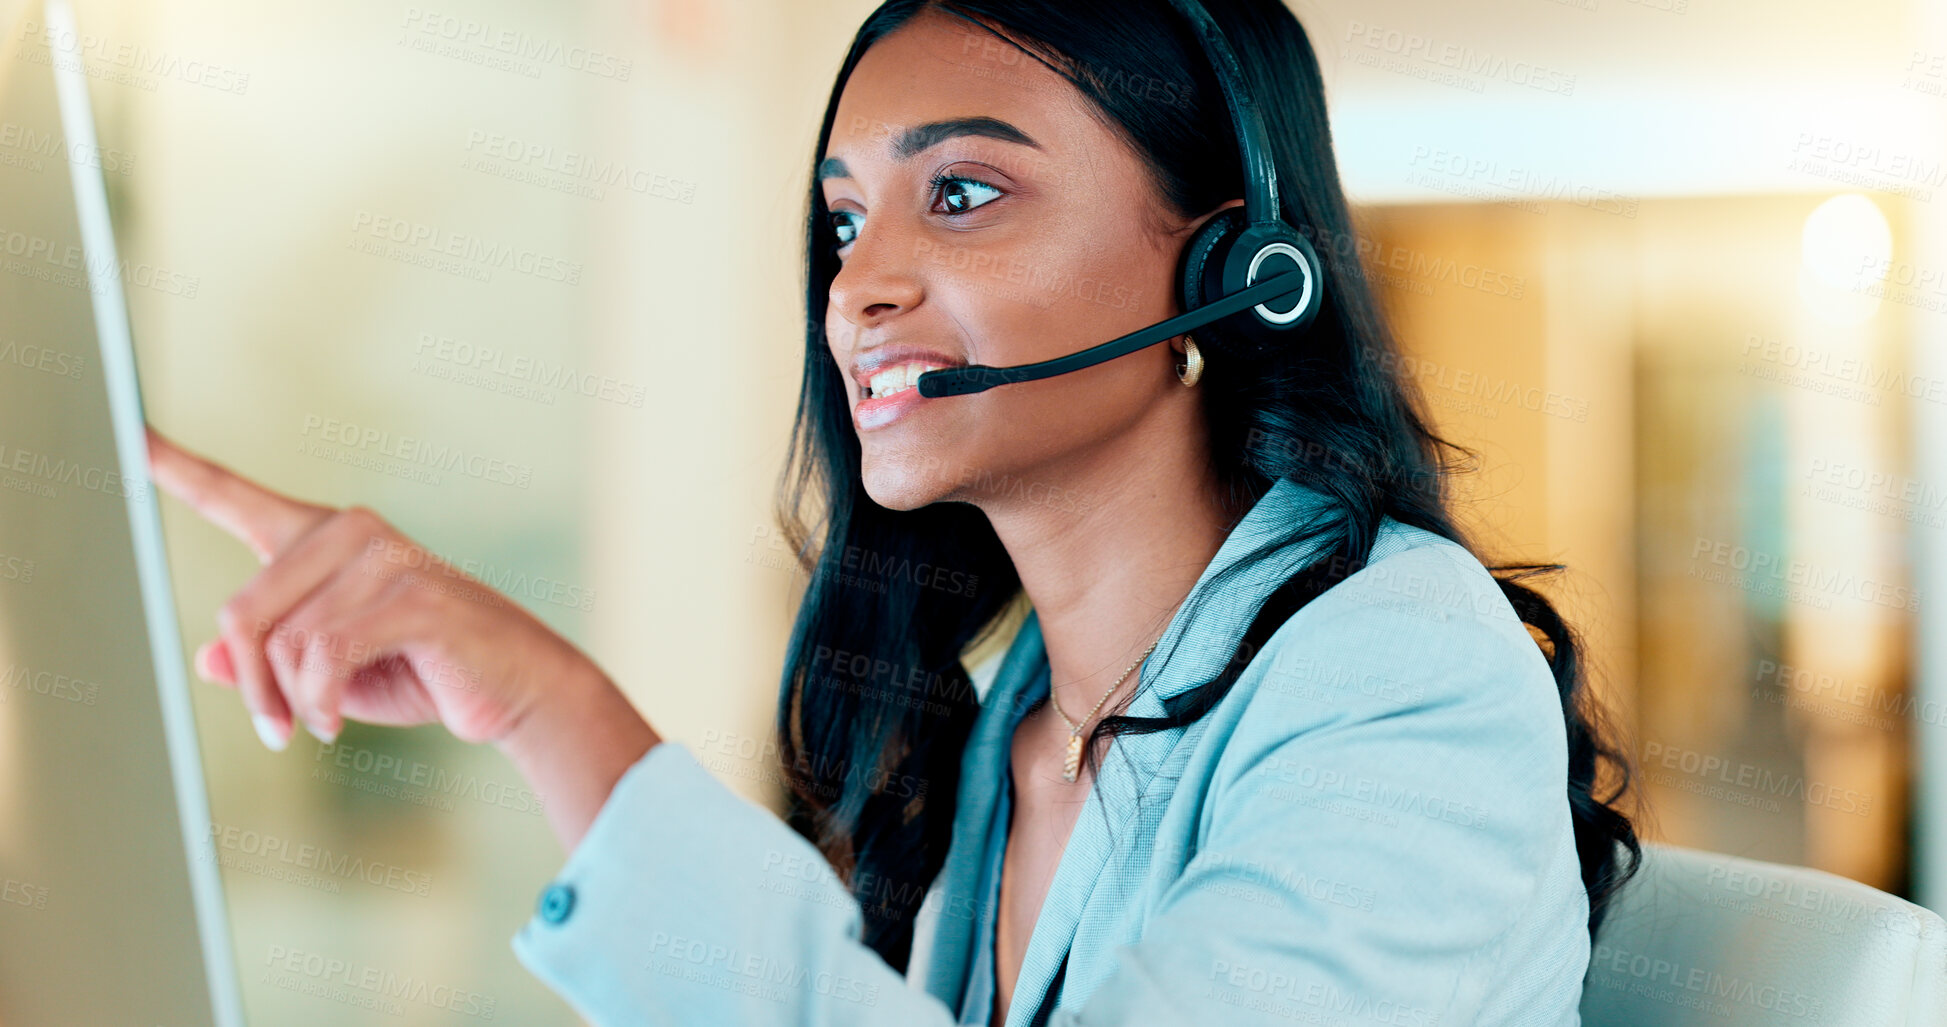 Buy stock photo Professional and helpful call centre woman using a headset, assists business consult. Helpful support service agent talks with client on call. Remote worker gives client advice telephonically